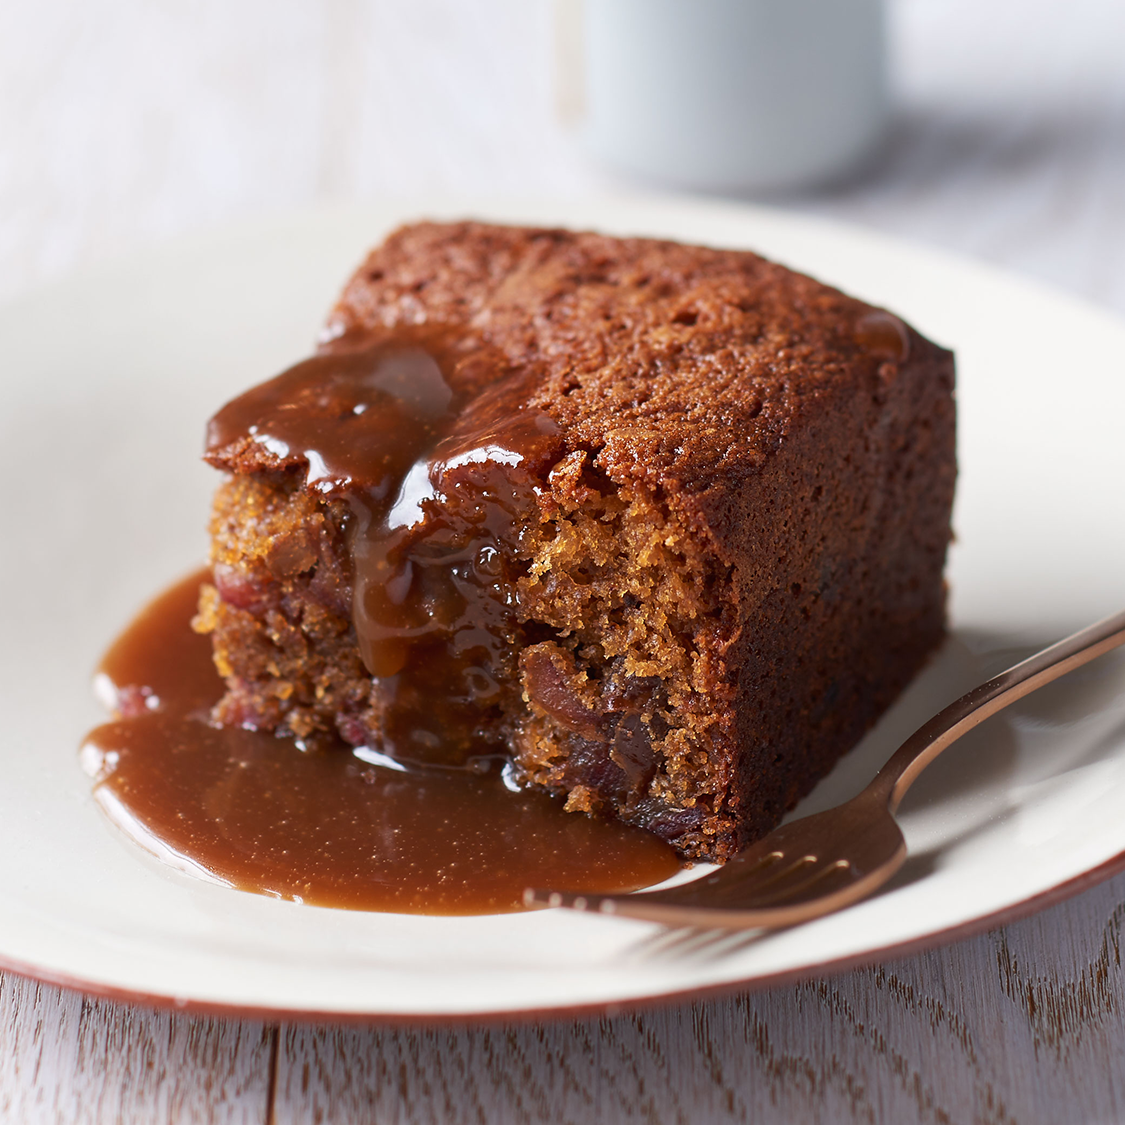 Best Sticky Toffee Pudding Recipe - How to Make Classic Sticky Toffee  Pudding